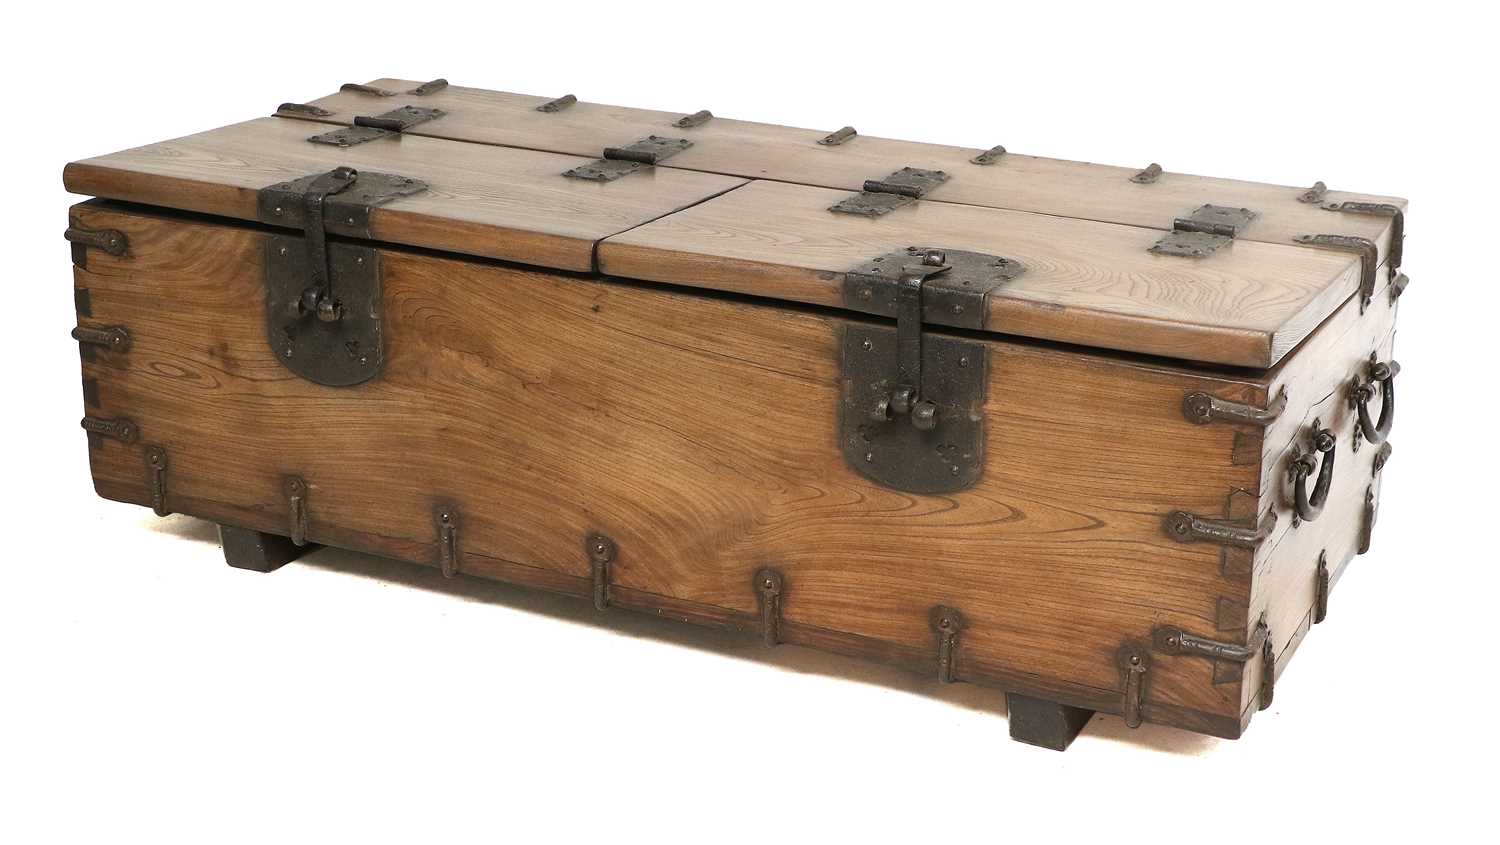 A Japanese Hardwood and Iron-Bound Trunk, modern, used as a coffee table with later glass top, the